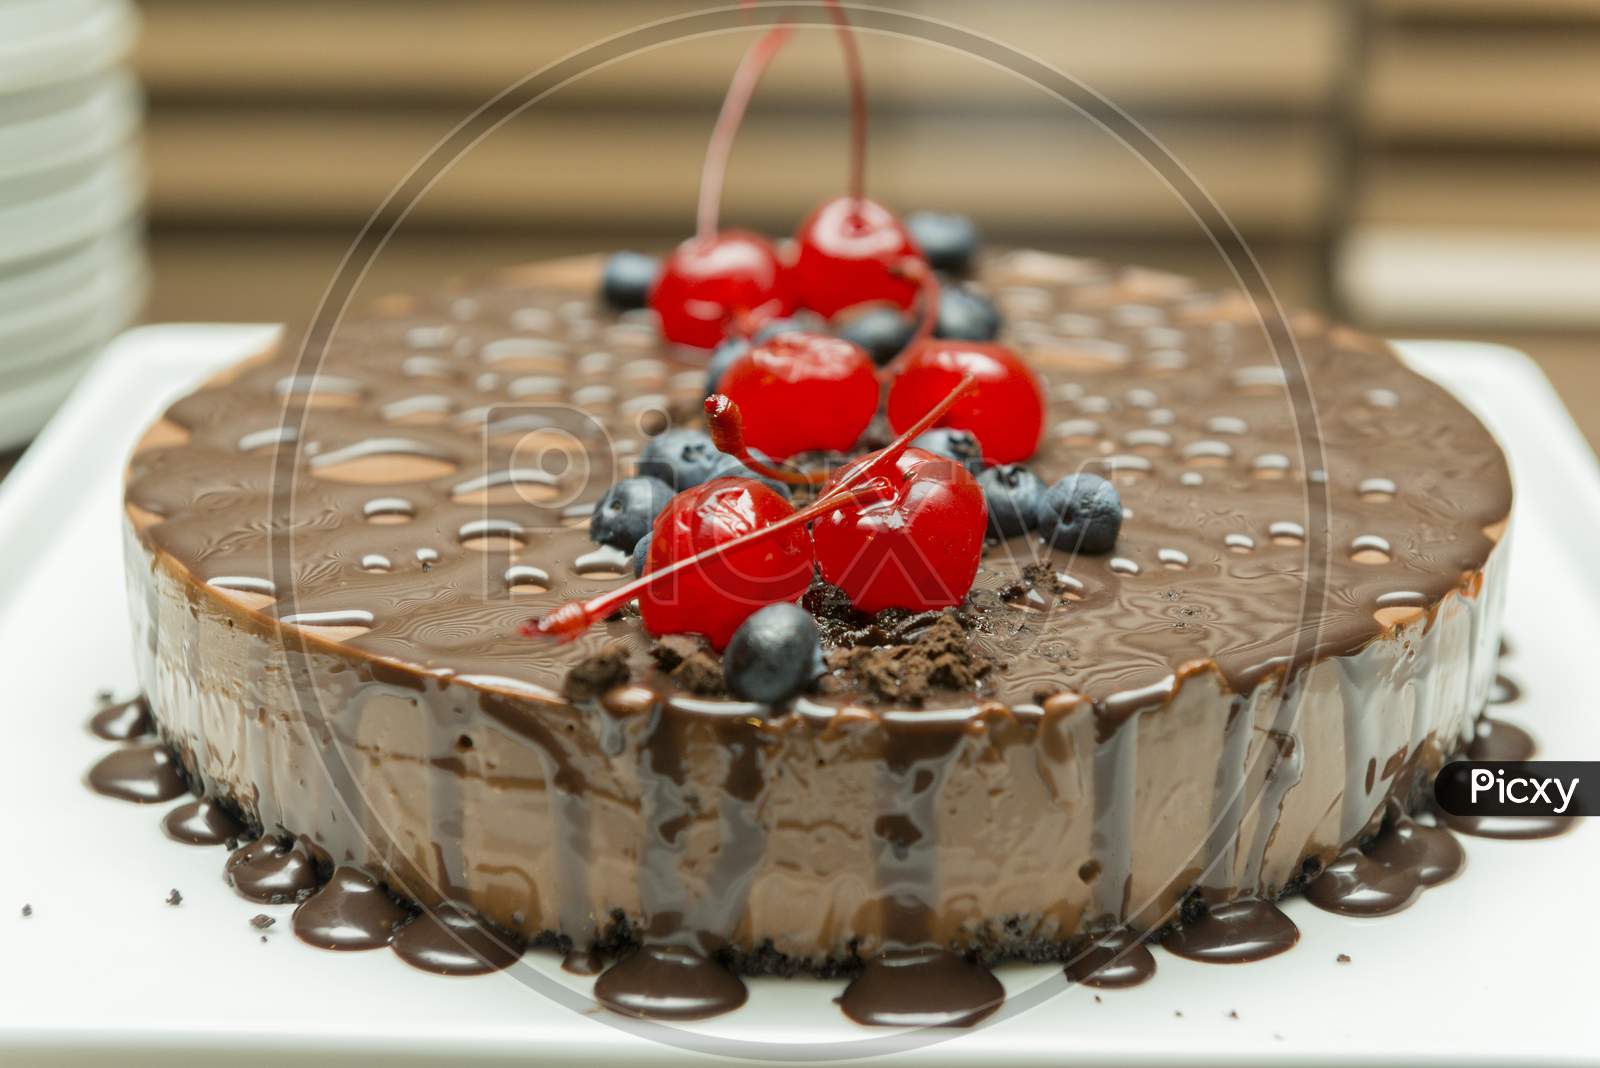 Beautiful And Tasty Chocolate Dessert, With Syrup And Cherry And Blueberry Topping.